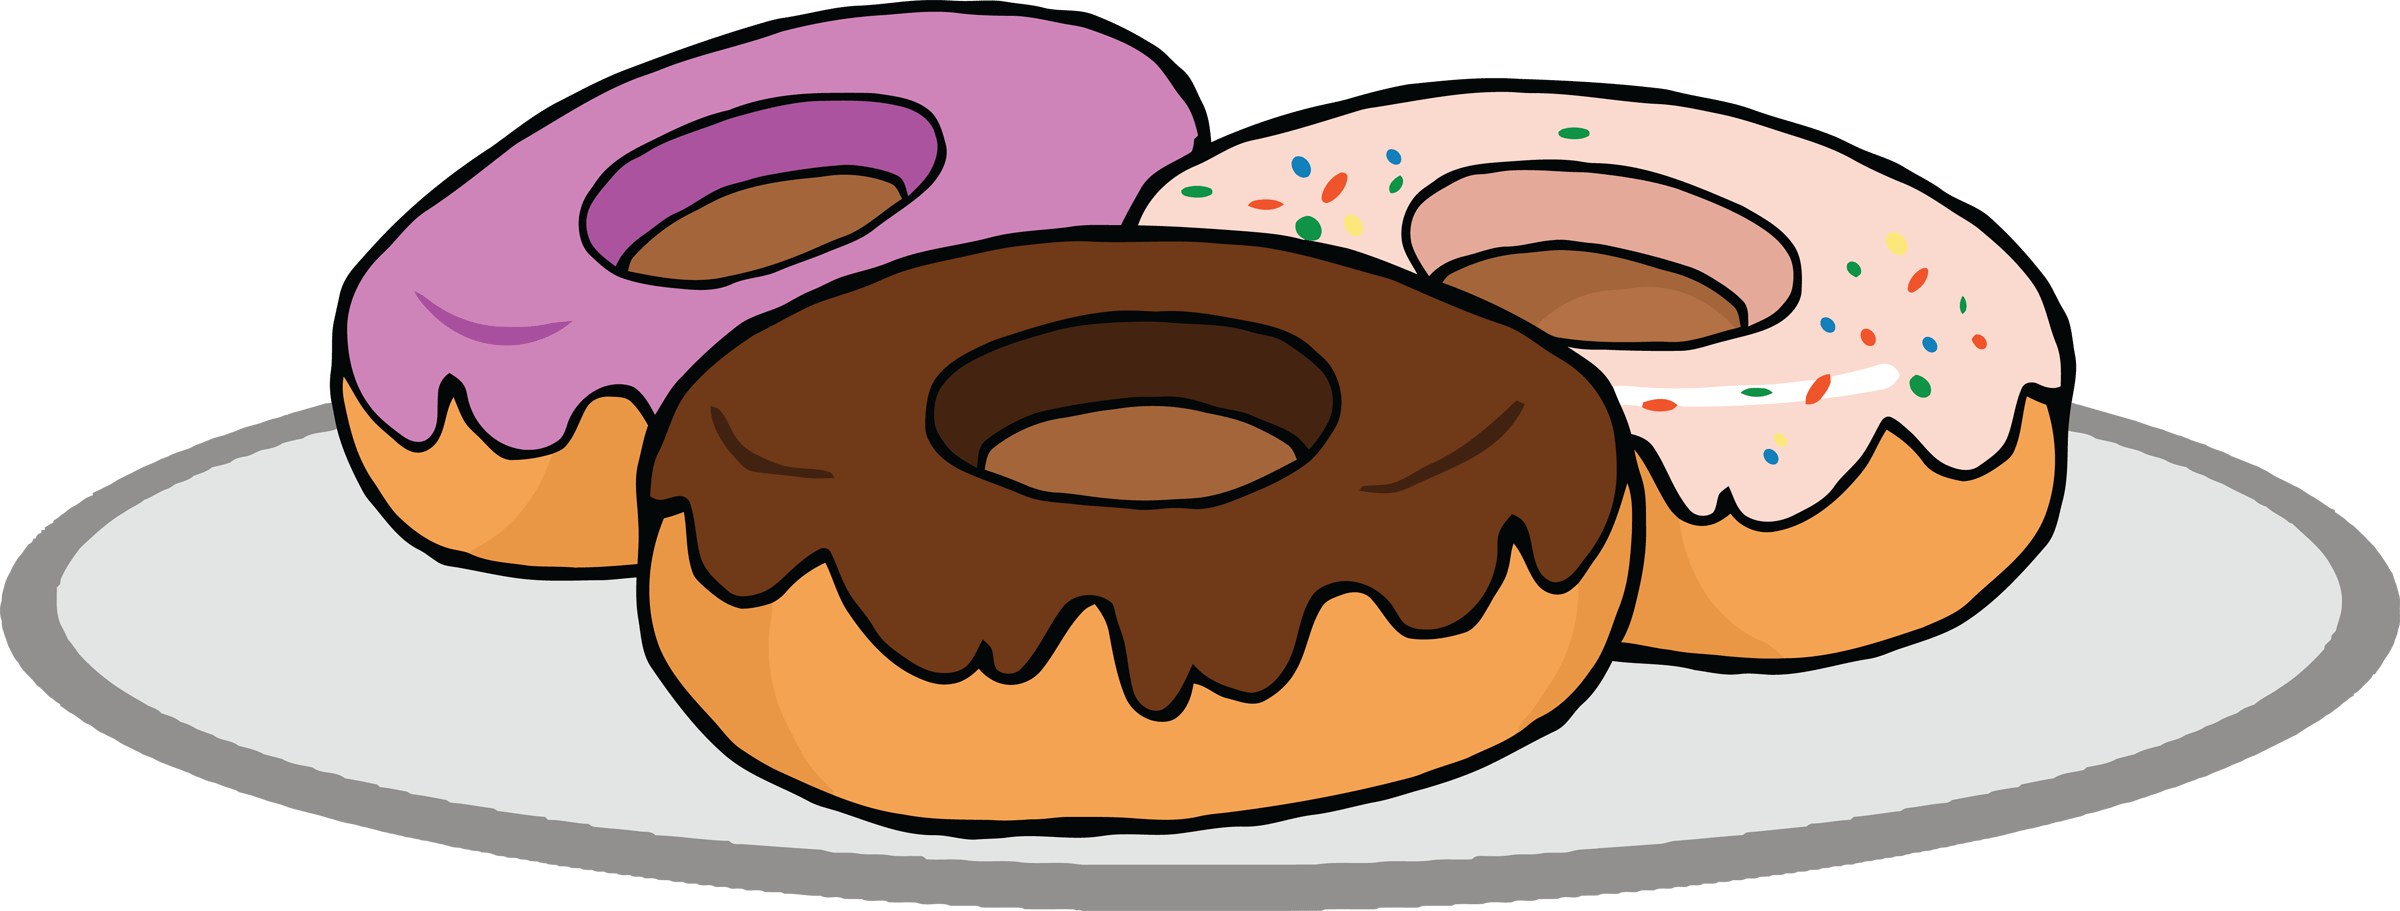 Coffee and clip art. Donuts clipart breakfast